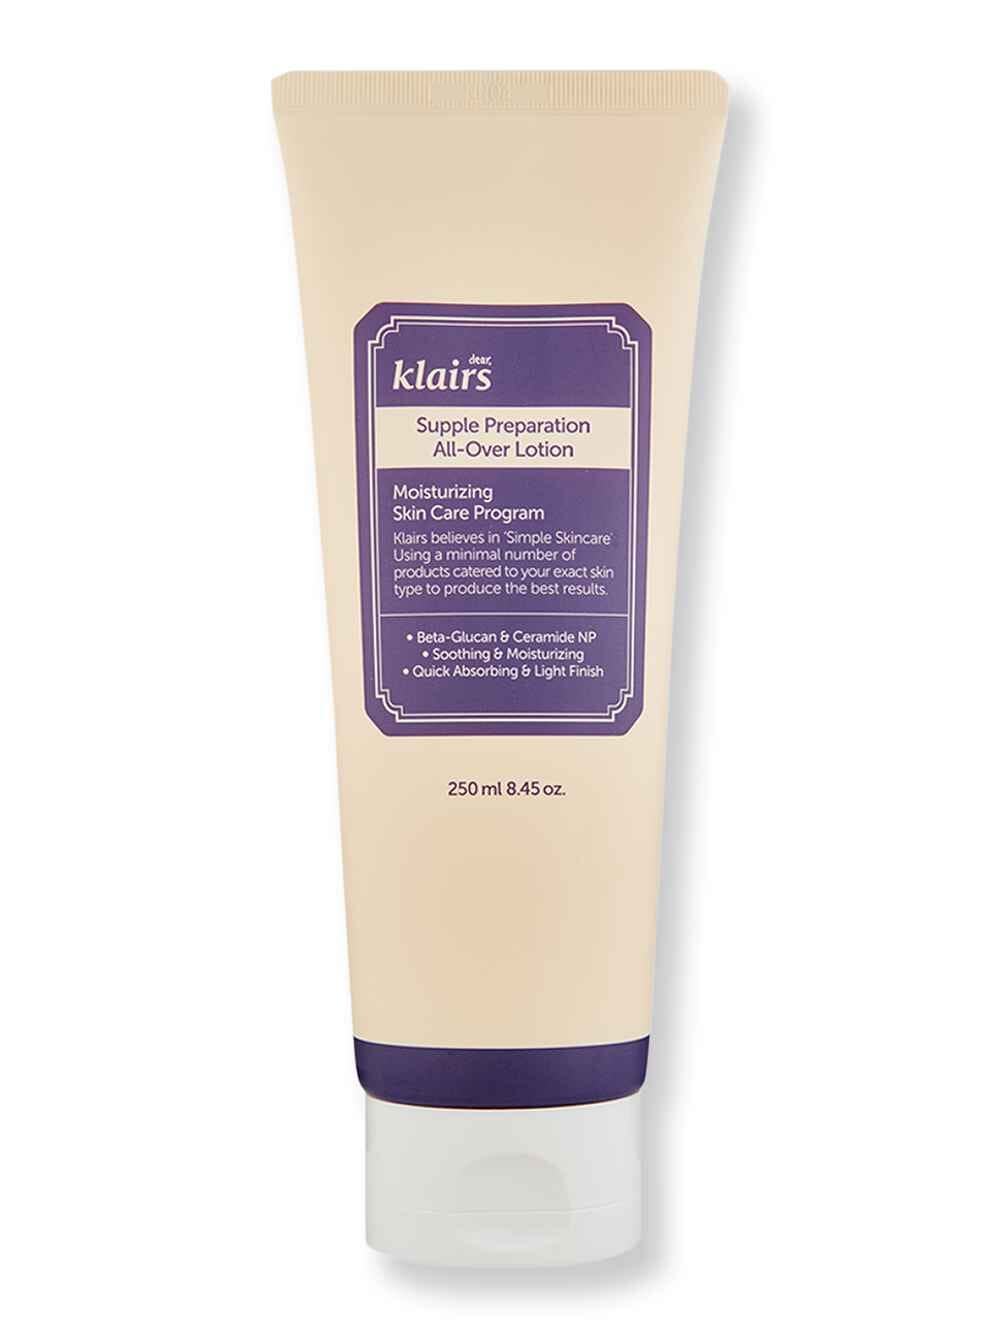 Klairs Klairs Supple Preparation All-Over Lotion 250 ml Body Lotions & Oils 